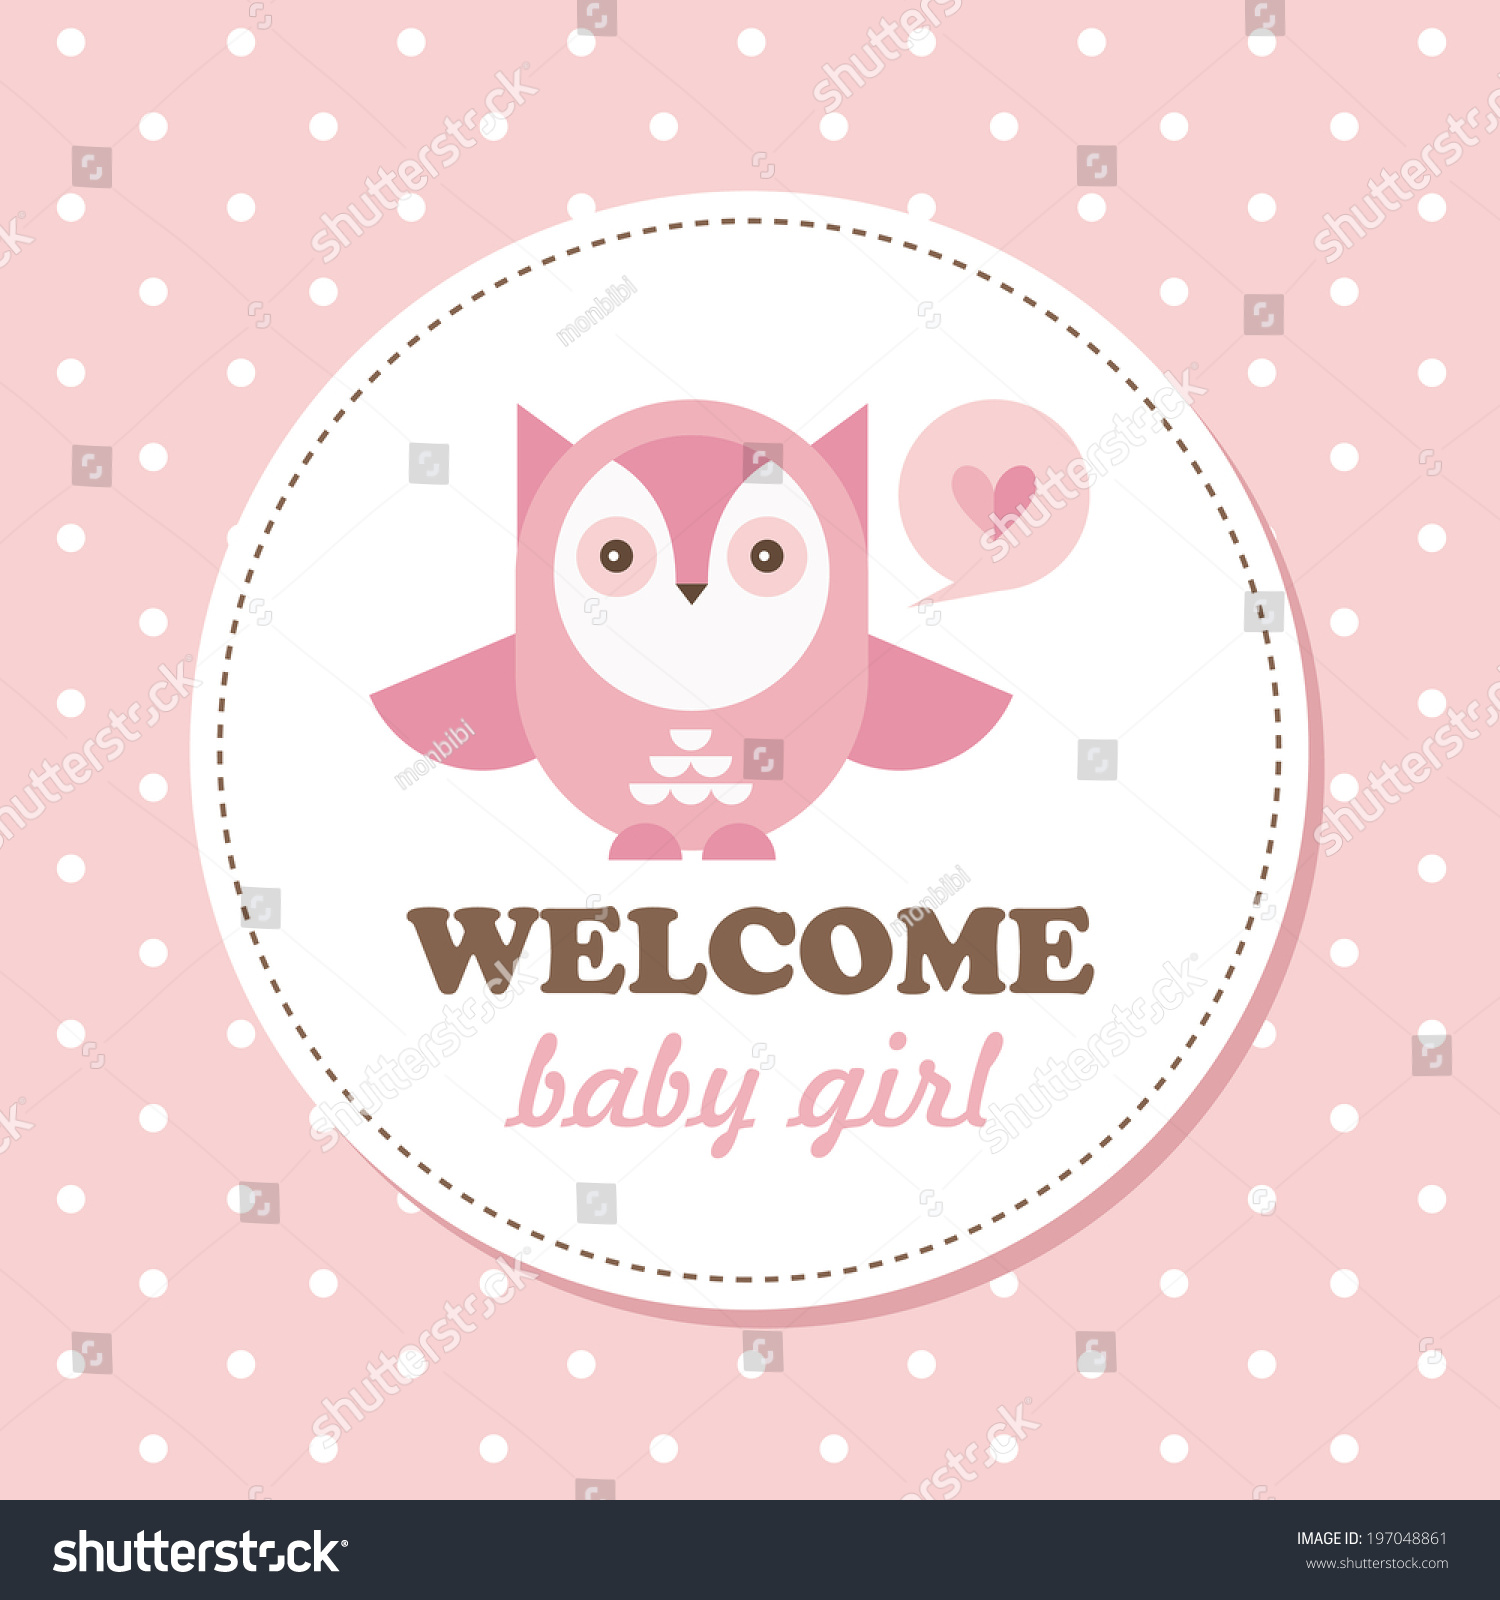 clipart baby cards - photo #46